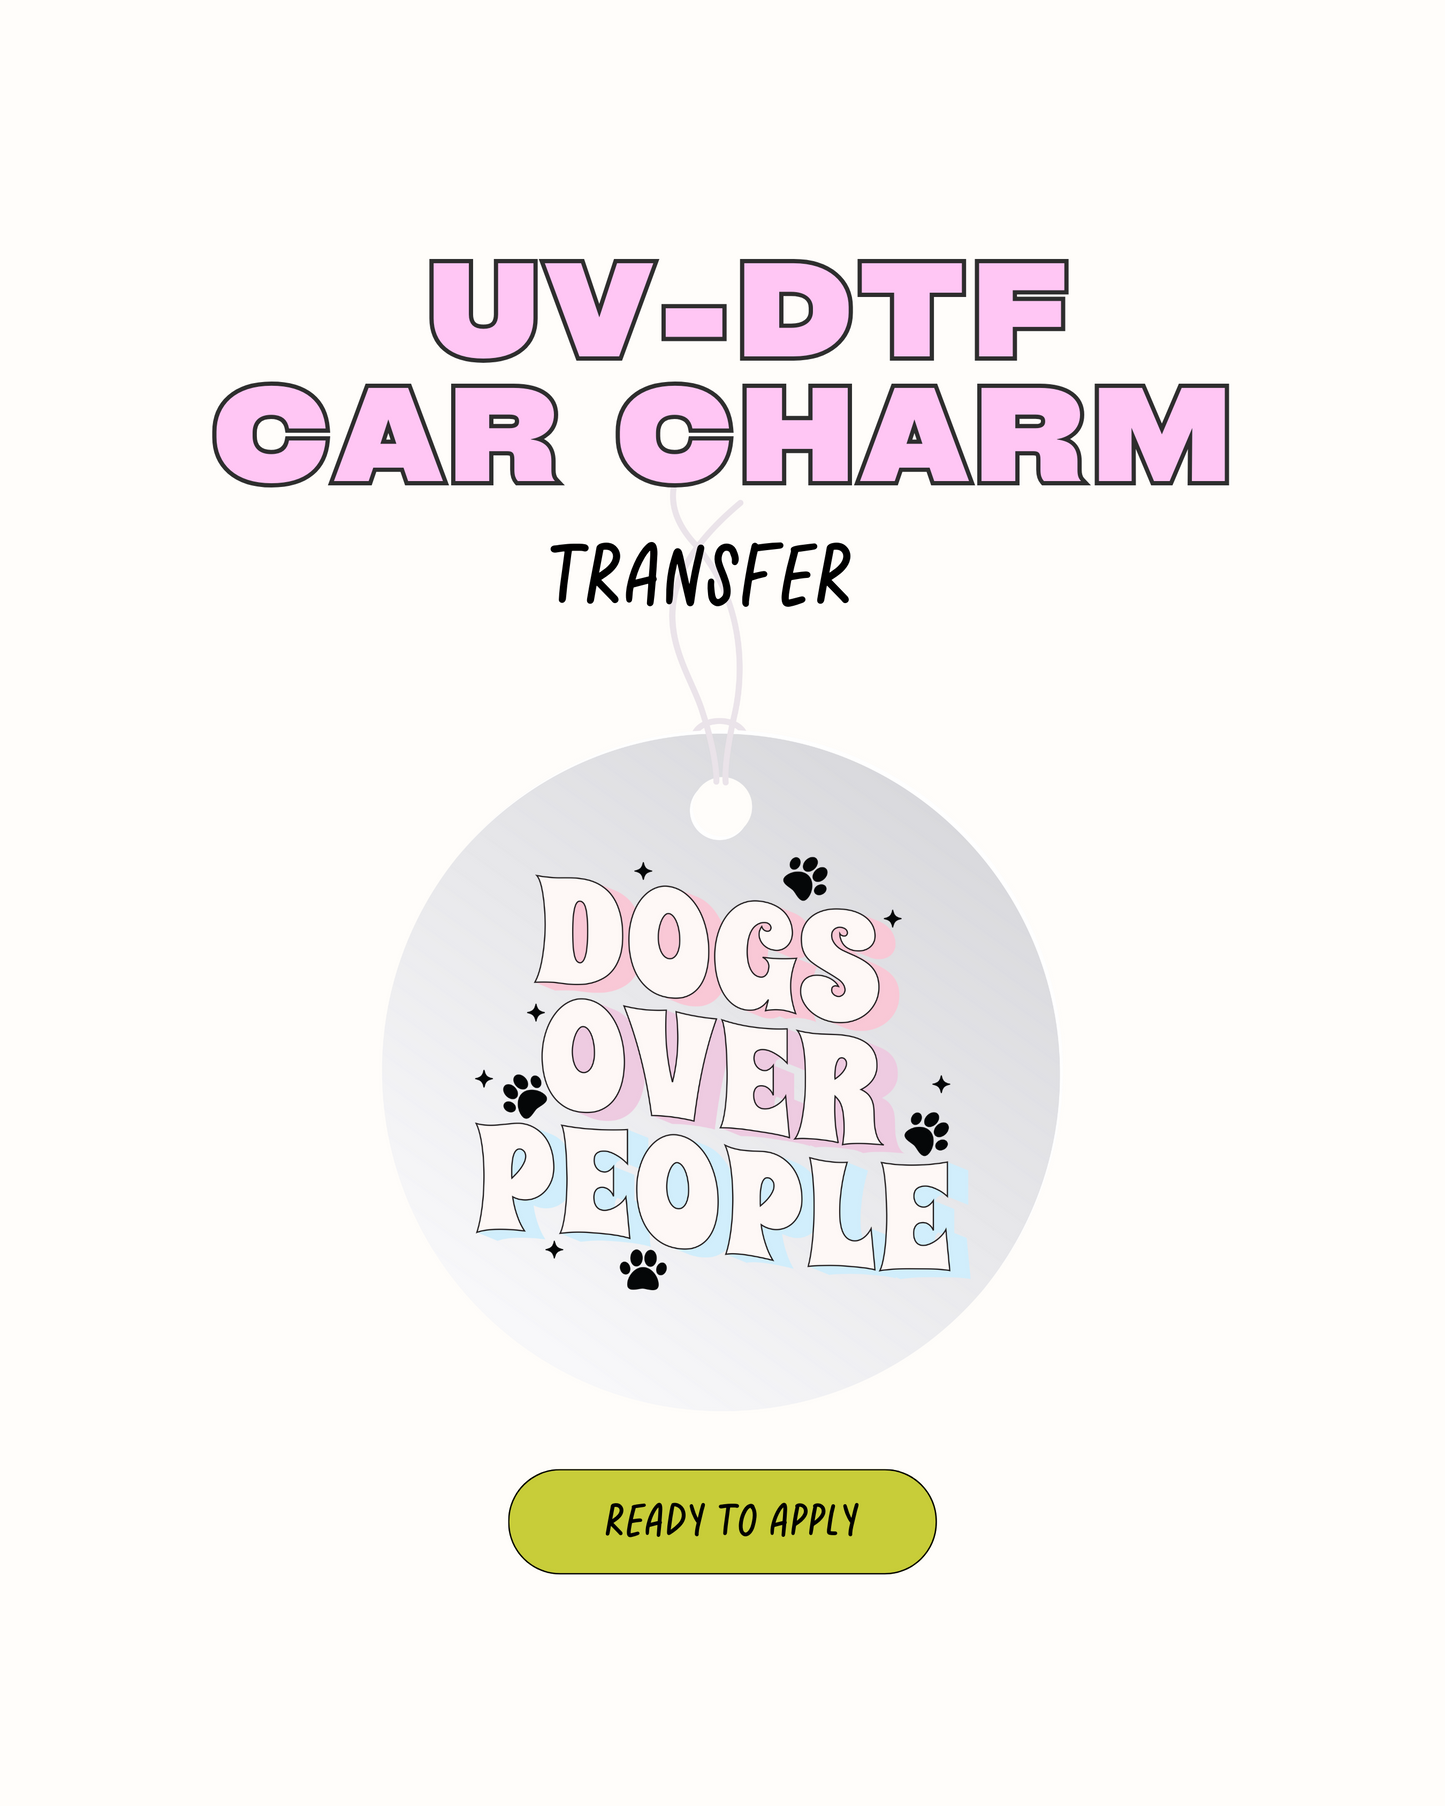 Dogs over people - Car Charm Decal